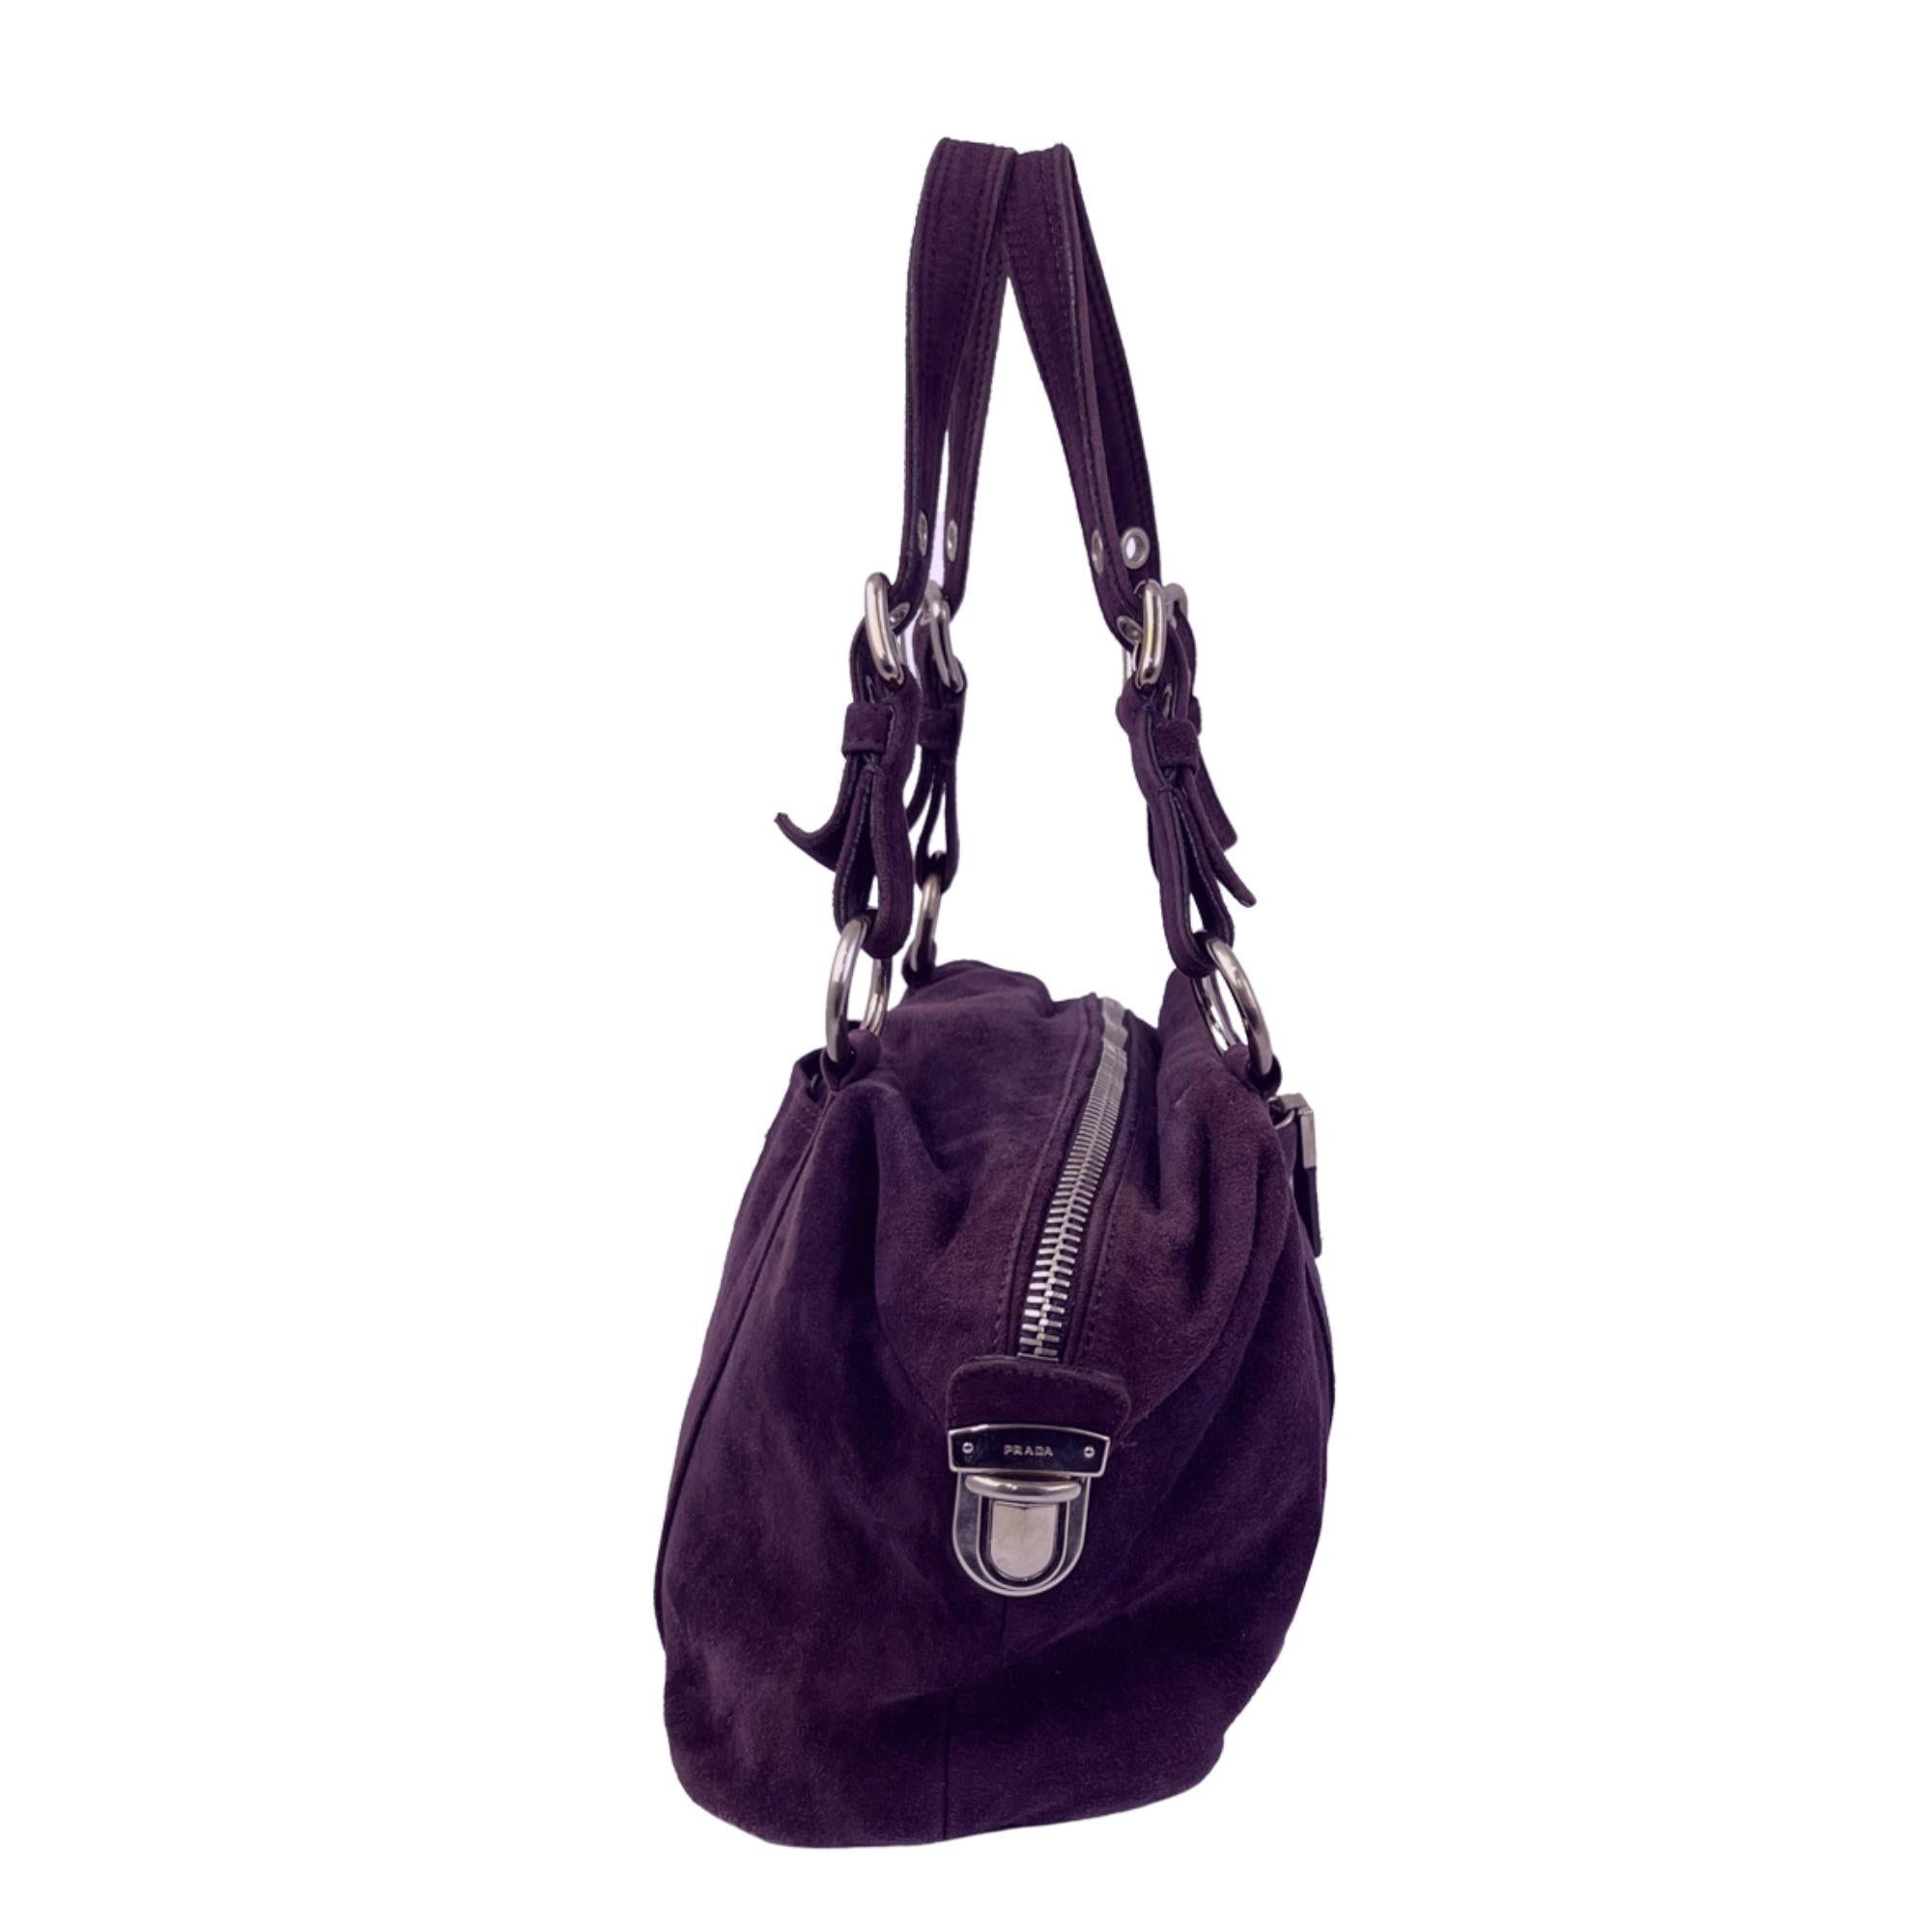 Prada Scamosciato shoulder bag in buttery soft purple suede and silver toned hardware. Features include dual adjustable handles, front zip pocket, back snap pocket, dual top zipper closure with side push buckles for expansion and black Prada logo